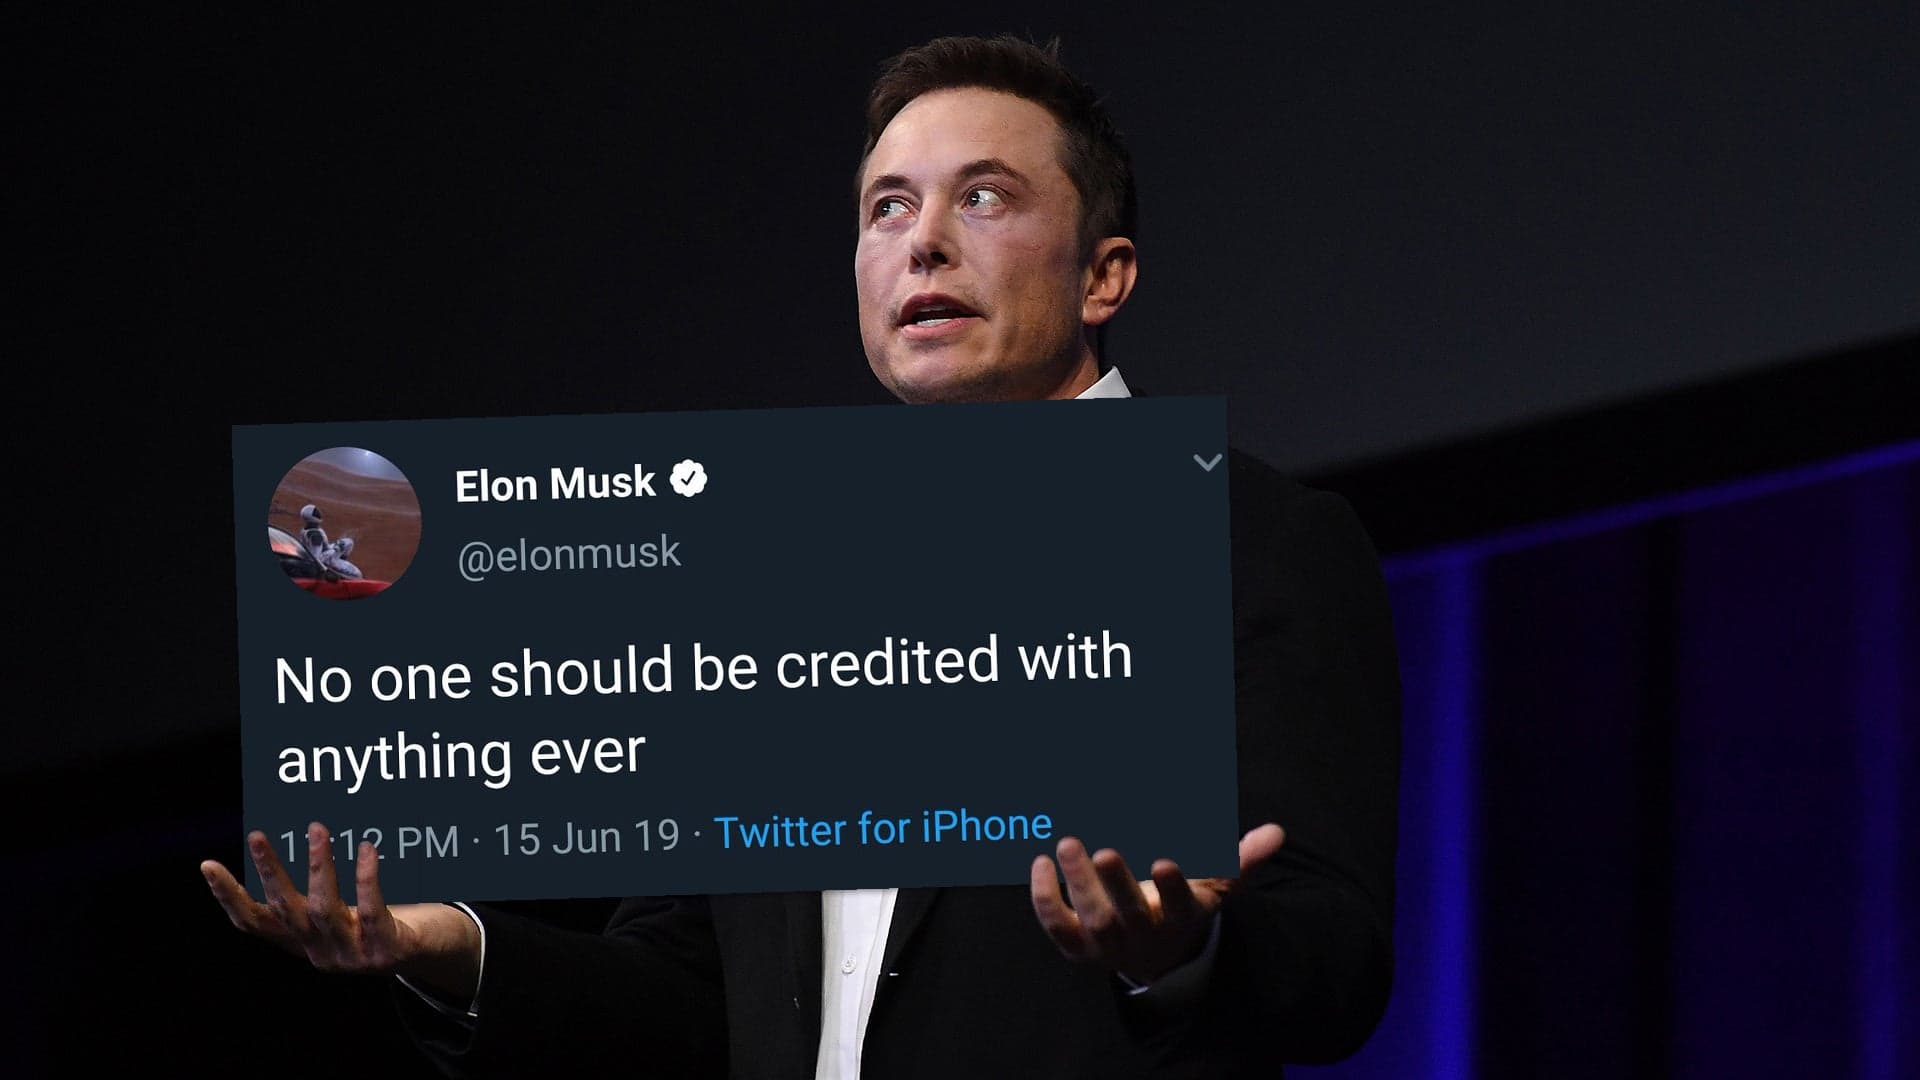 Tesla’s Elon Musk Rants on Twitter, Changes Name to ‘Daddy DotCom’ After Controversial Post